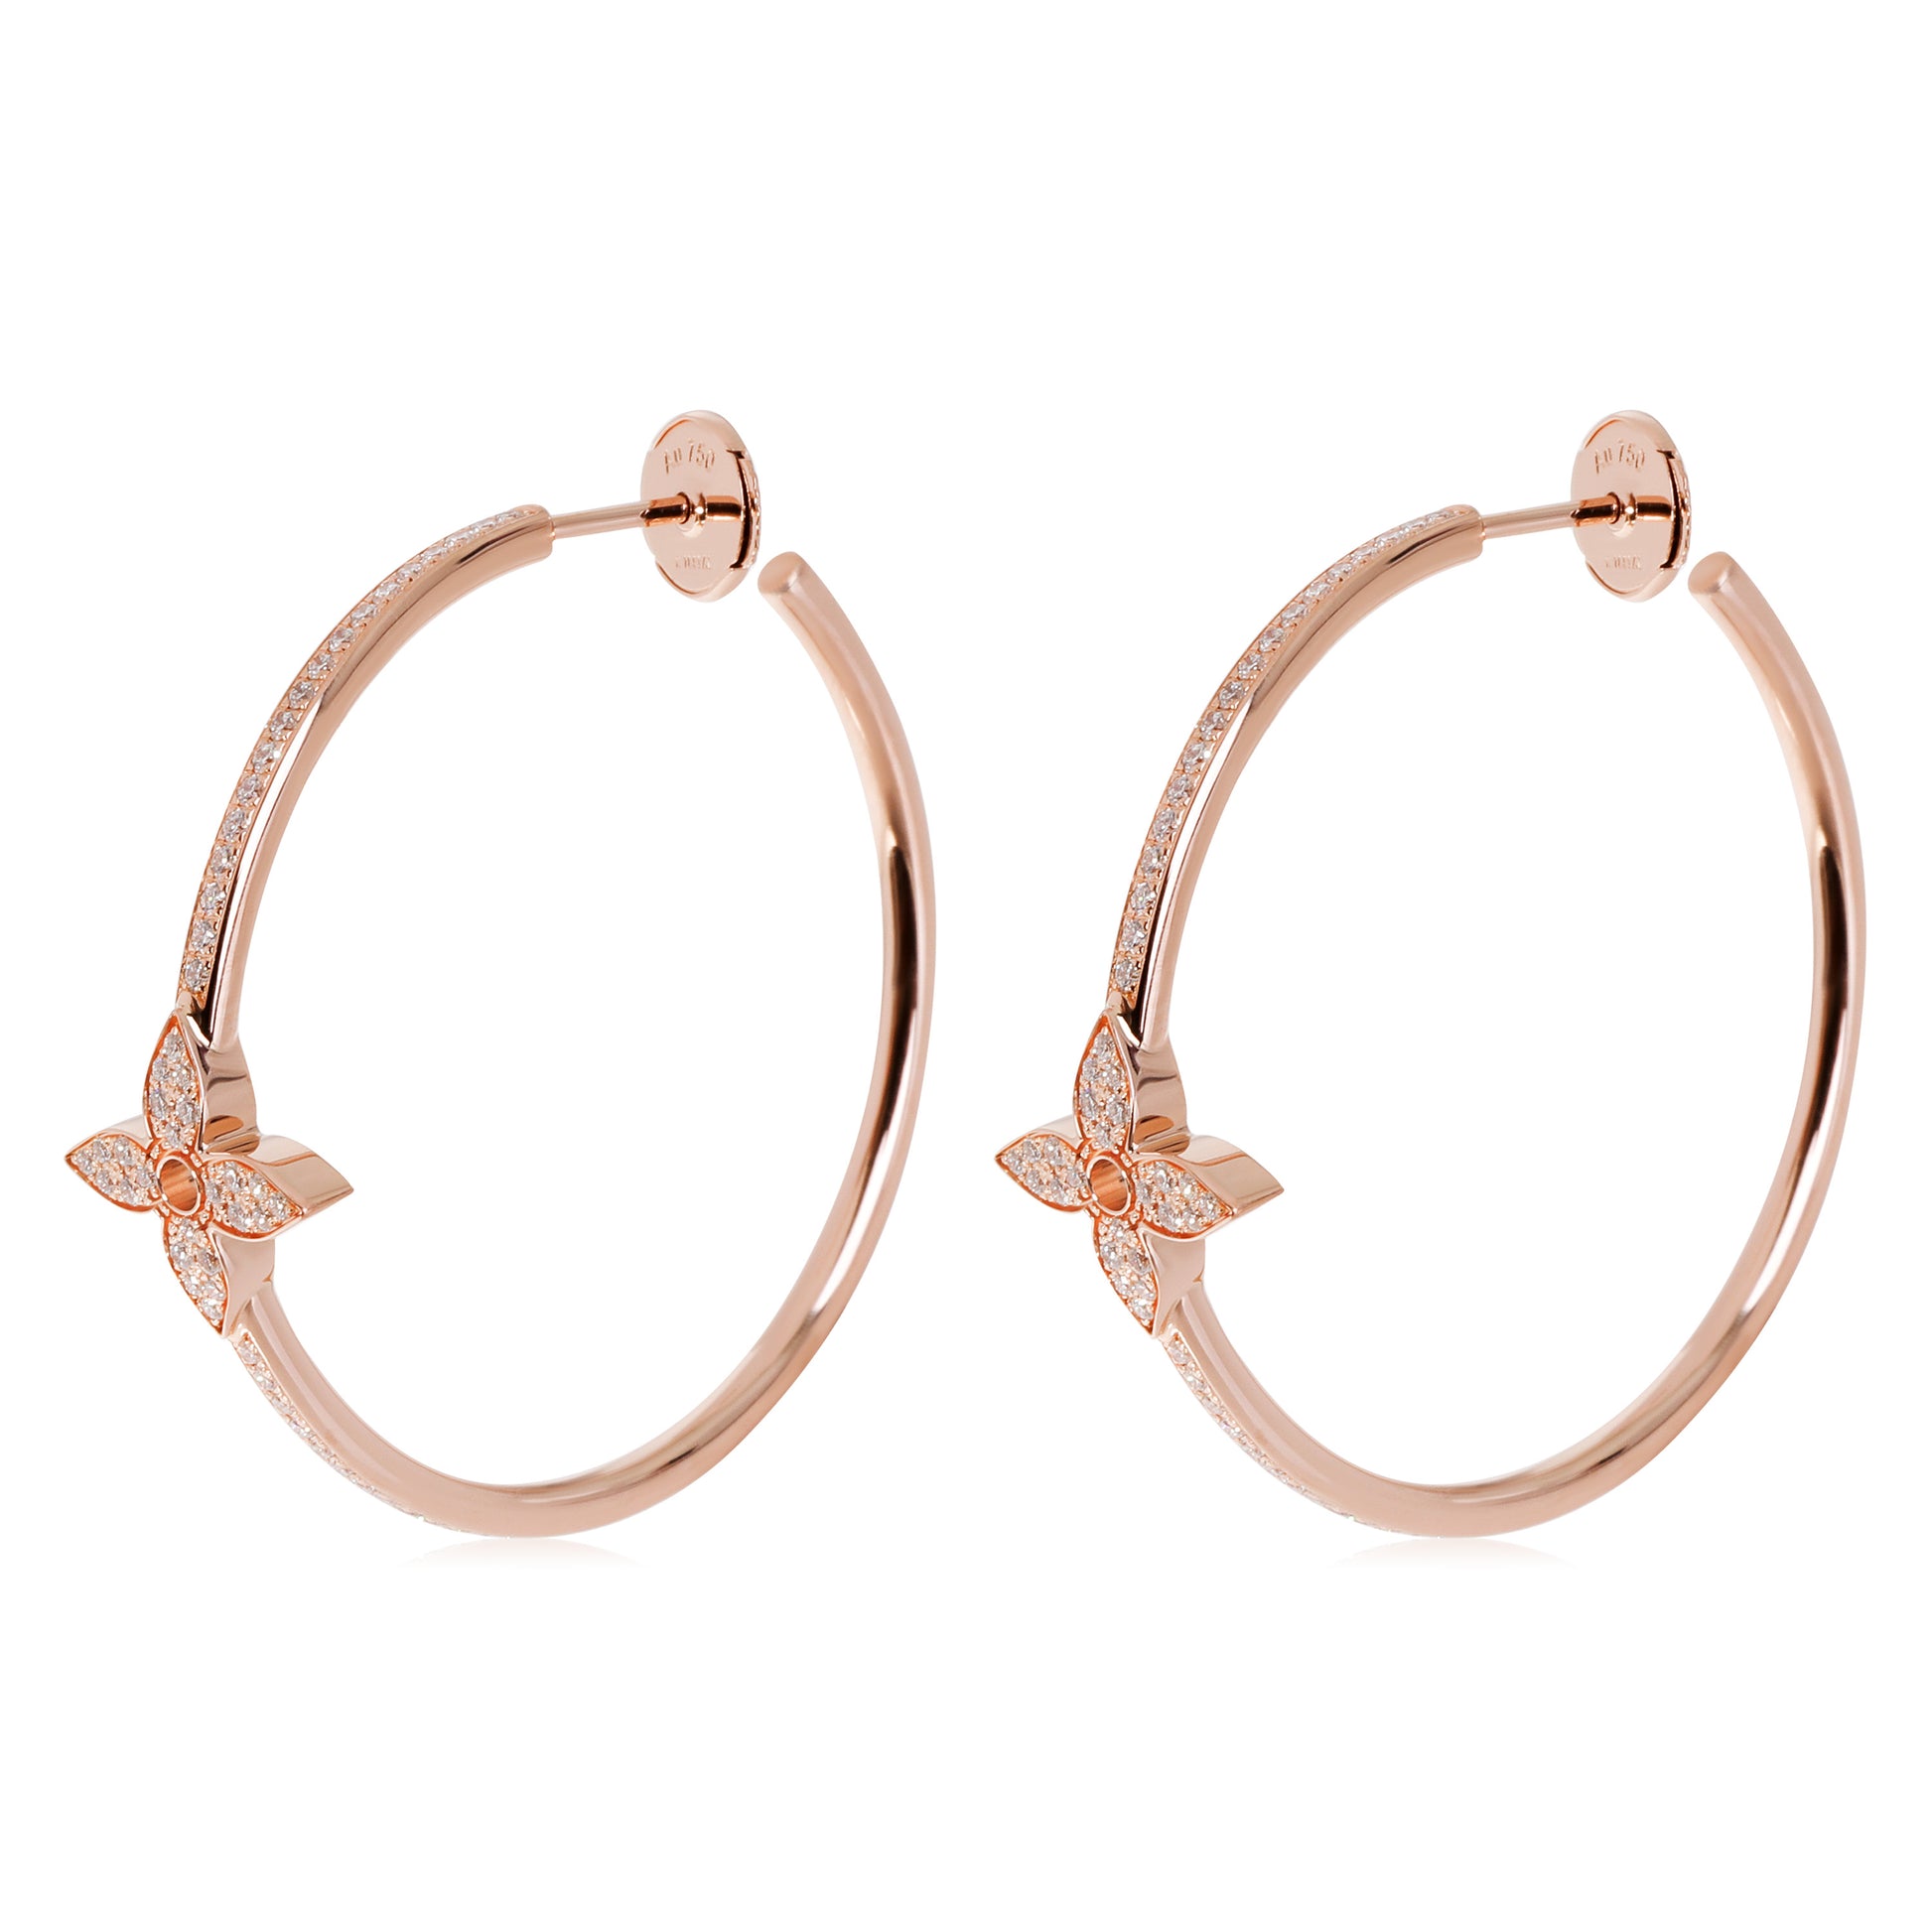 Idylle Blossom Small Hoop, Pink Gold And Diamond - Per Unit - Categories